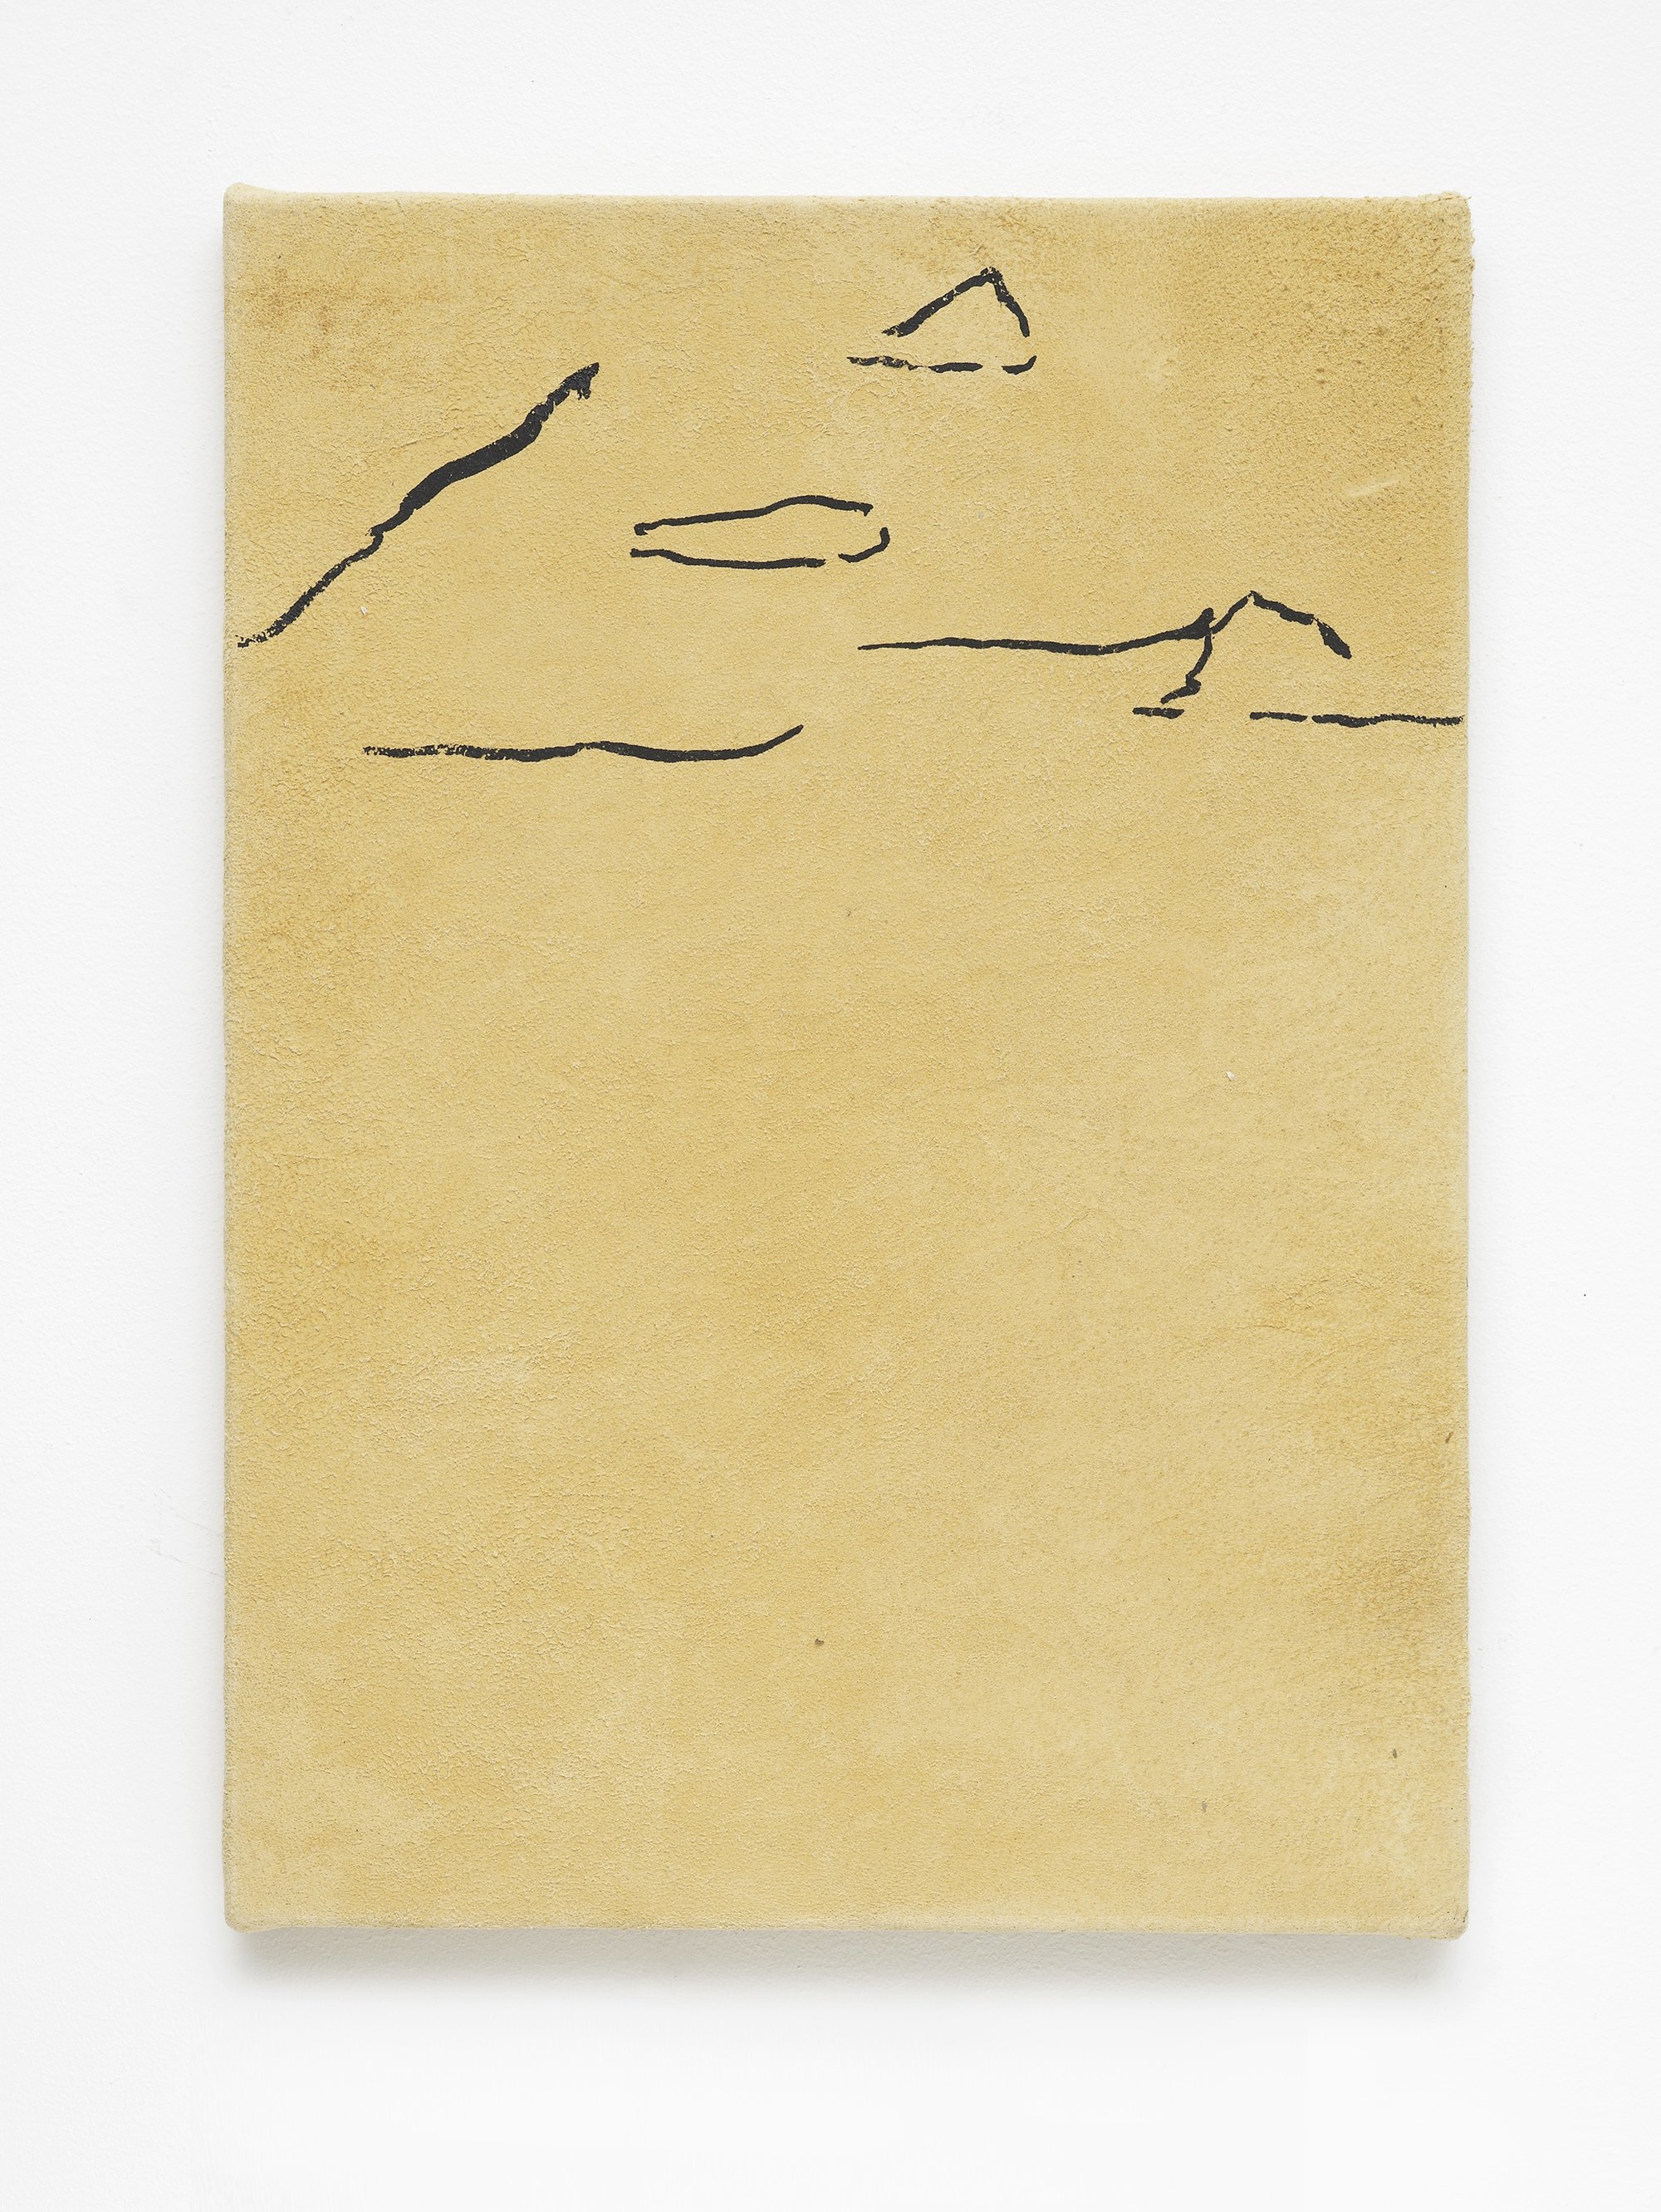 Ian Law, untitled, water based pigment ink on chamois leather, 36 x 25.2 cm, 2013